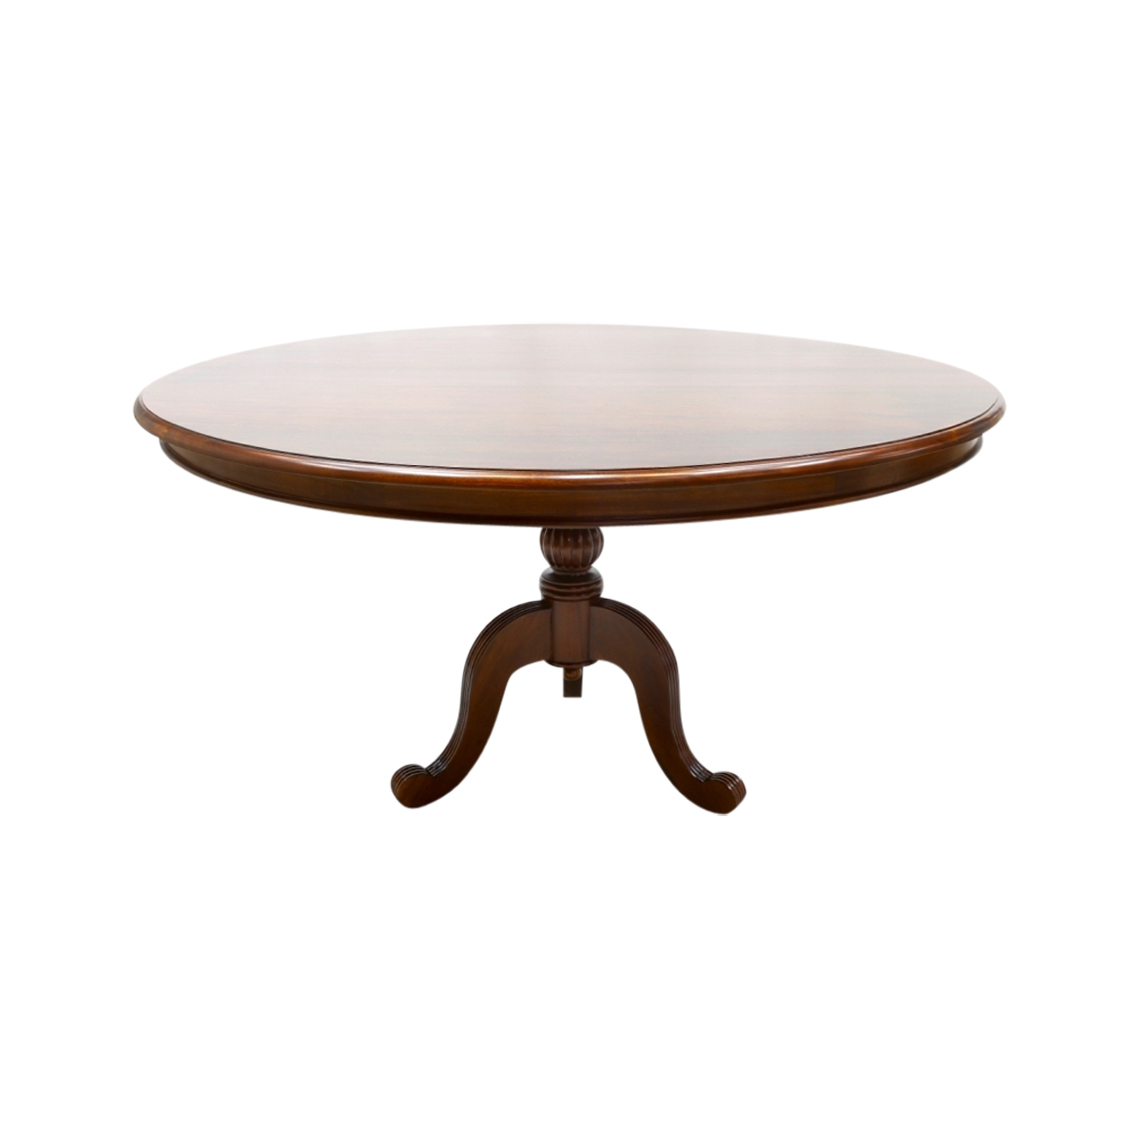 Round Dining Table, Antique Circular Mahogany Dining Table